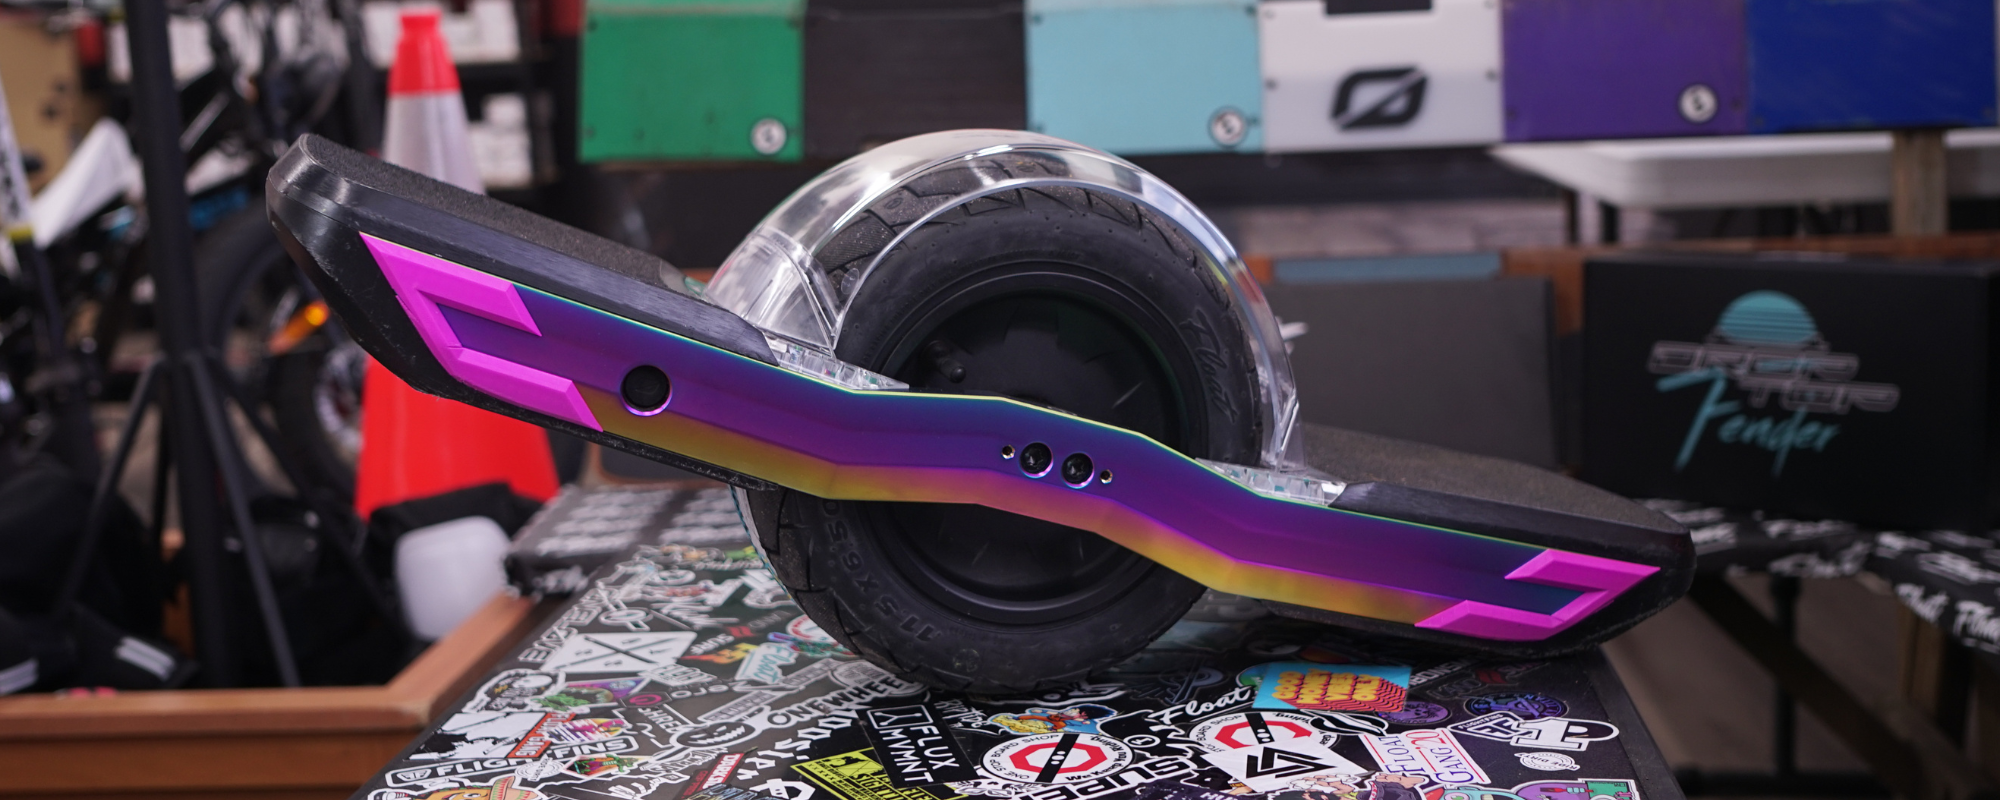 Onewheel Gt/s Series Tracker Keepers the Original for Airtag